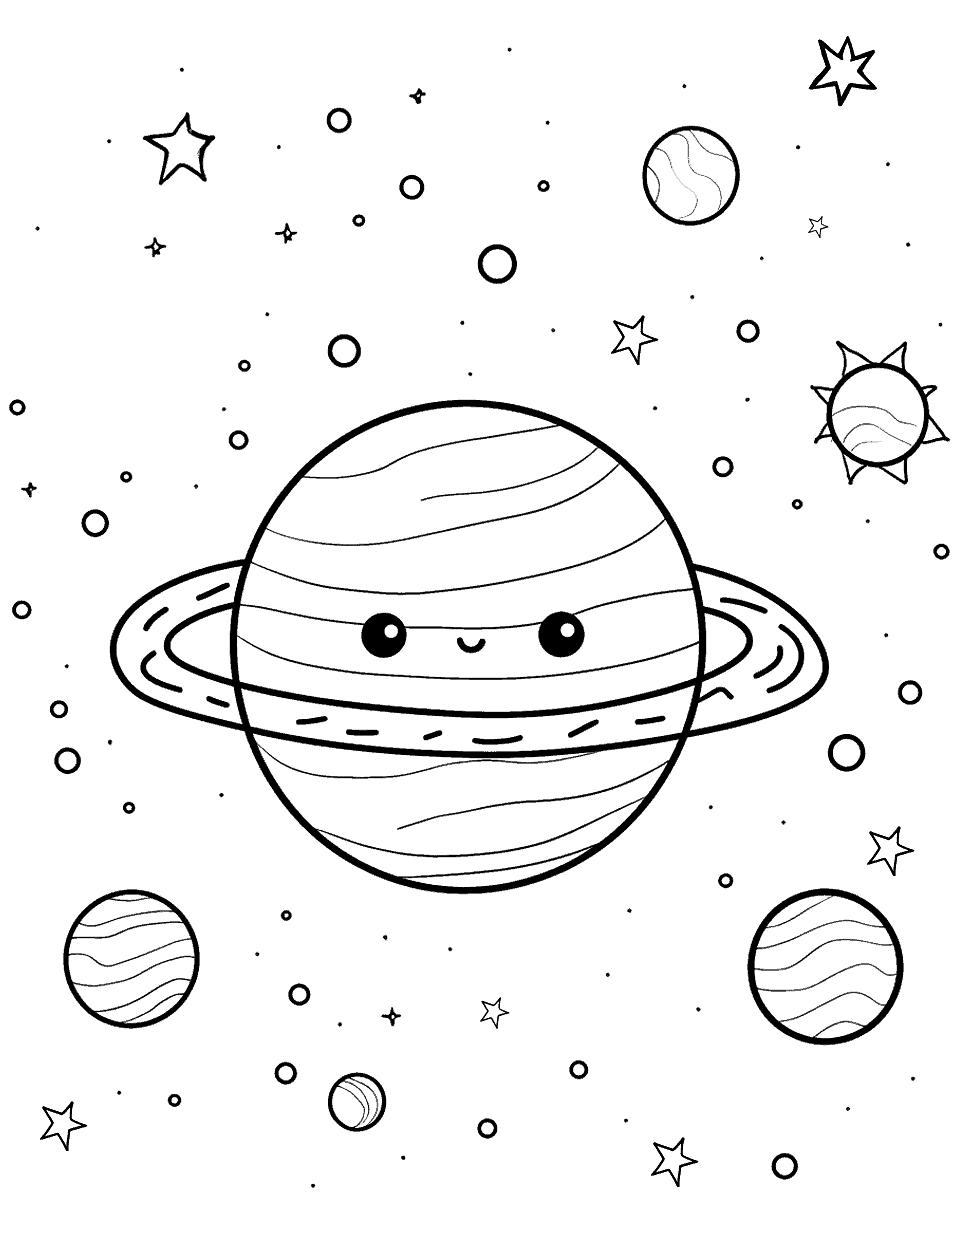 Dwarf Planet Eris Solar System Coloring Page - Eris, a cute dwarf planet with a star-filled background.